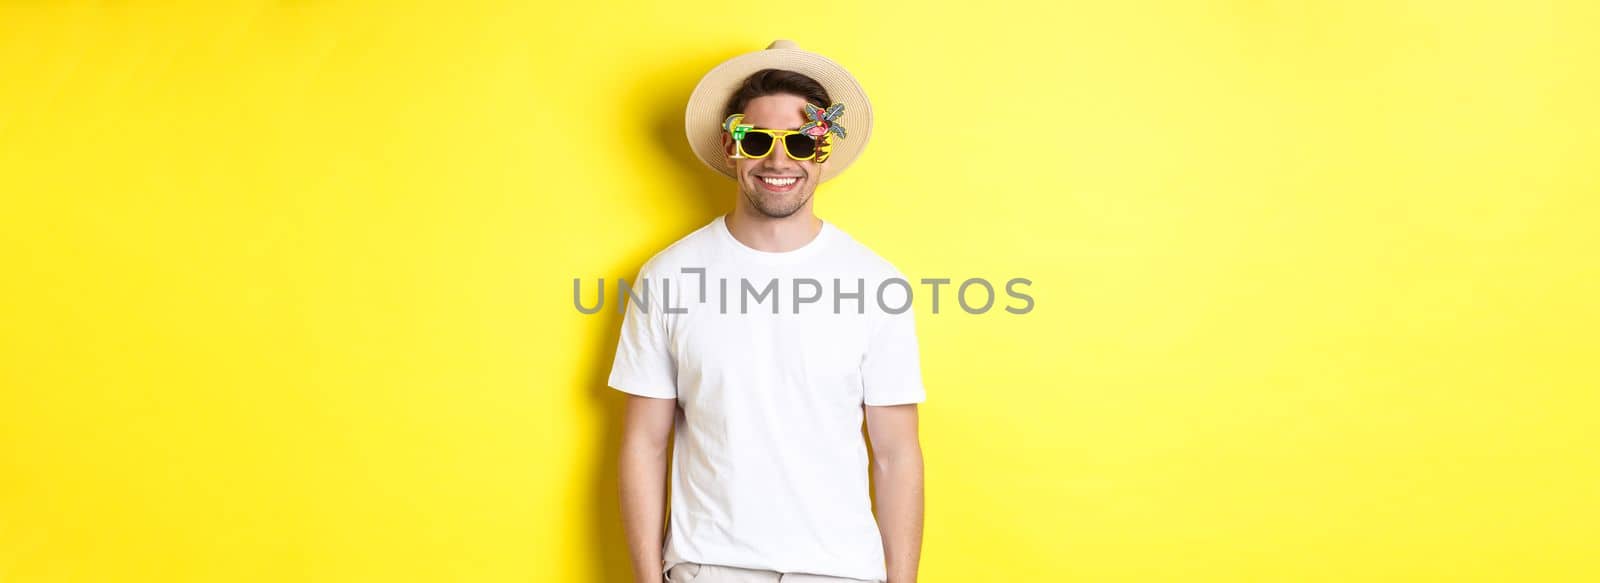 Concept of tourism and vacation. Relaxed smiling man enjoying supper trip, wearing sunglasses and straw hat, yellow background.